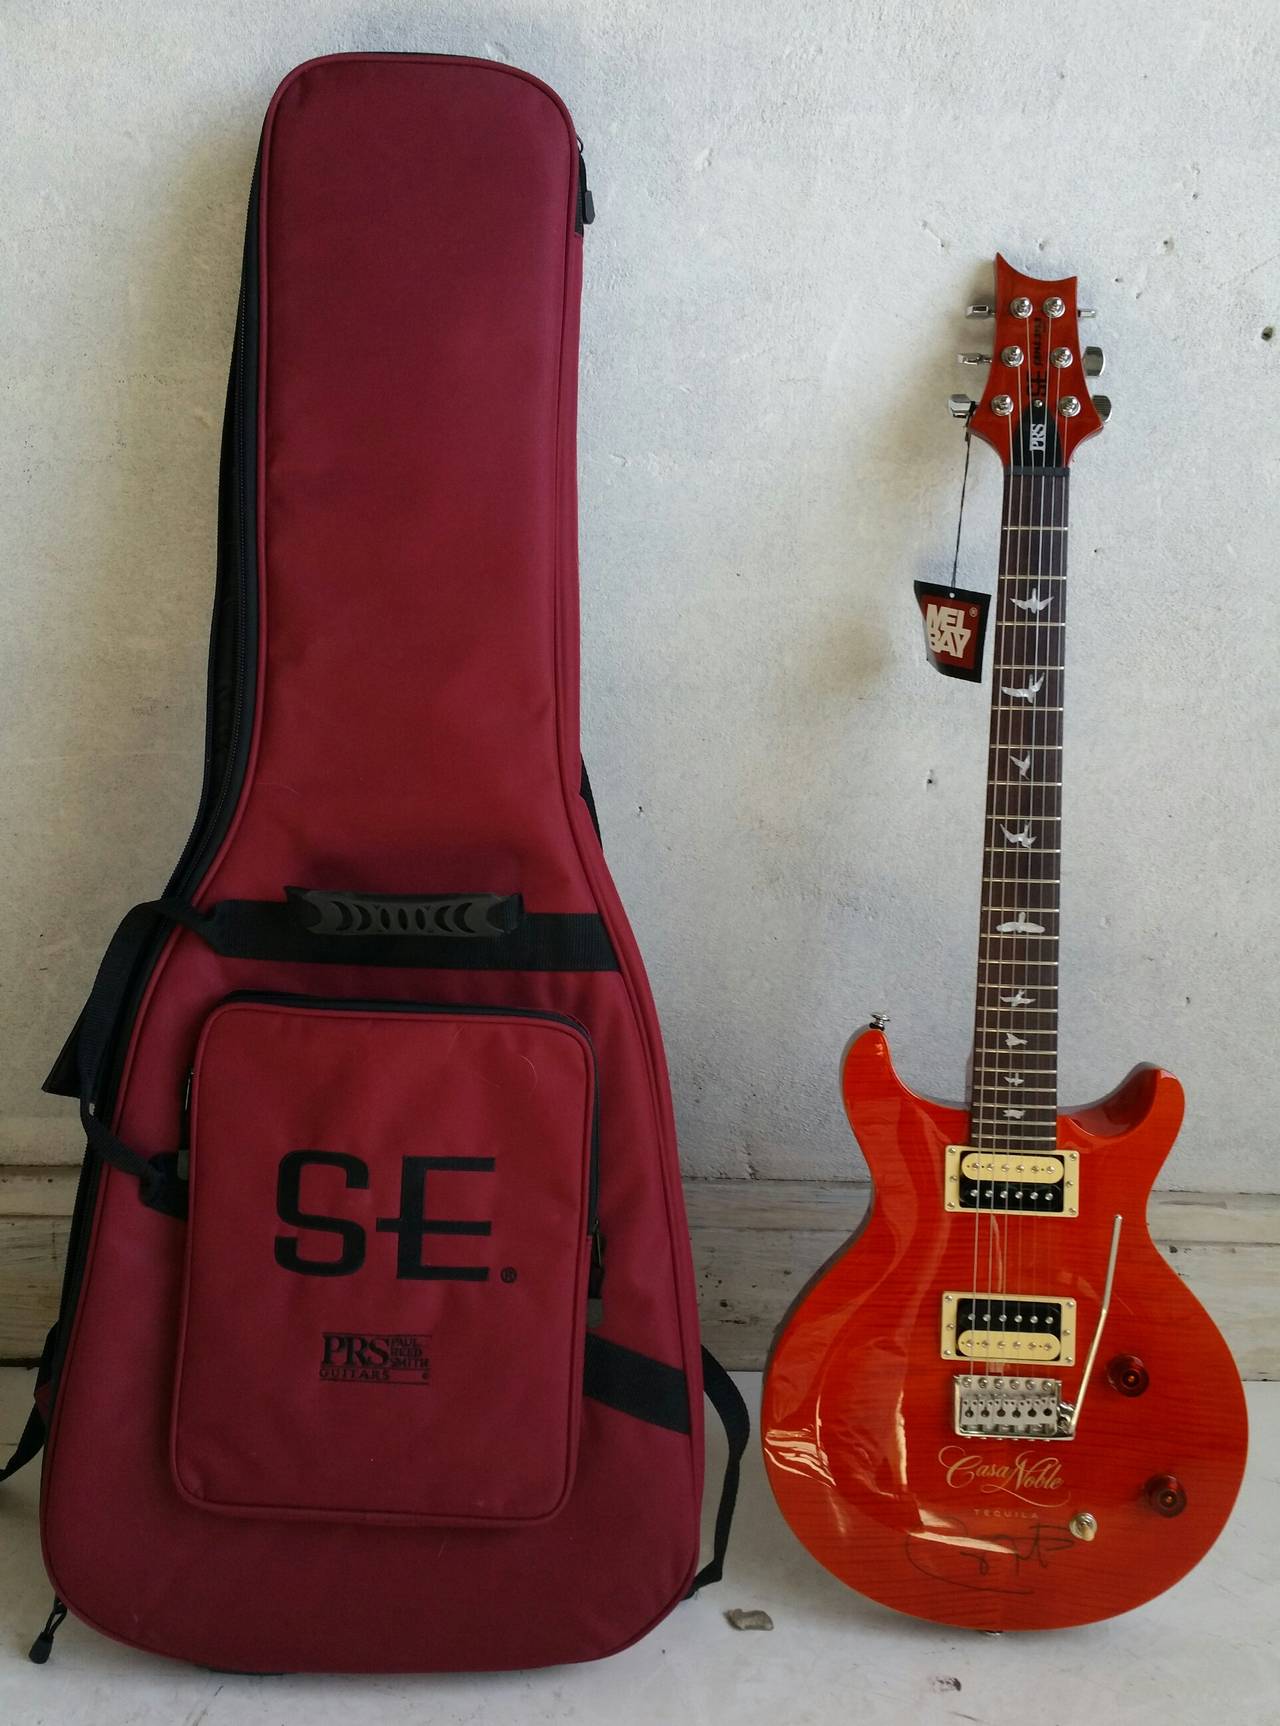 PRS electric guitar, Paul Reed Smith. Orange finish throughout the top, body and neck. The Santana MD features a 